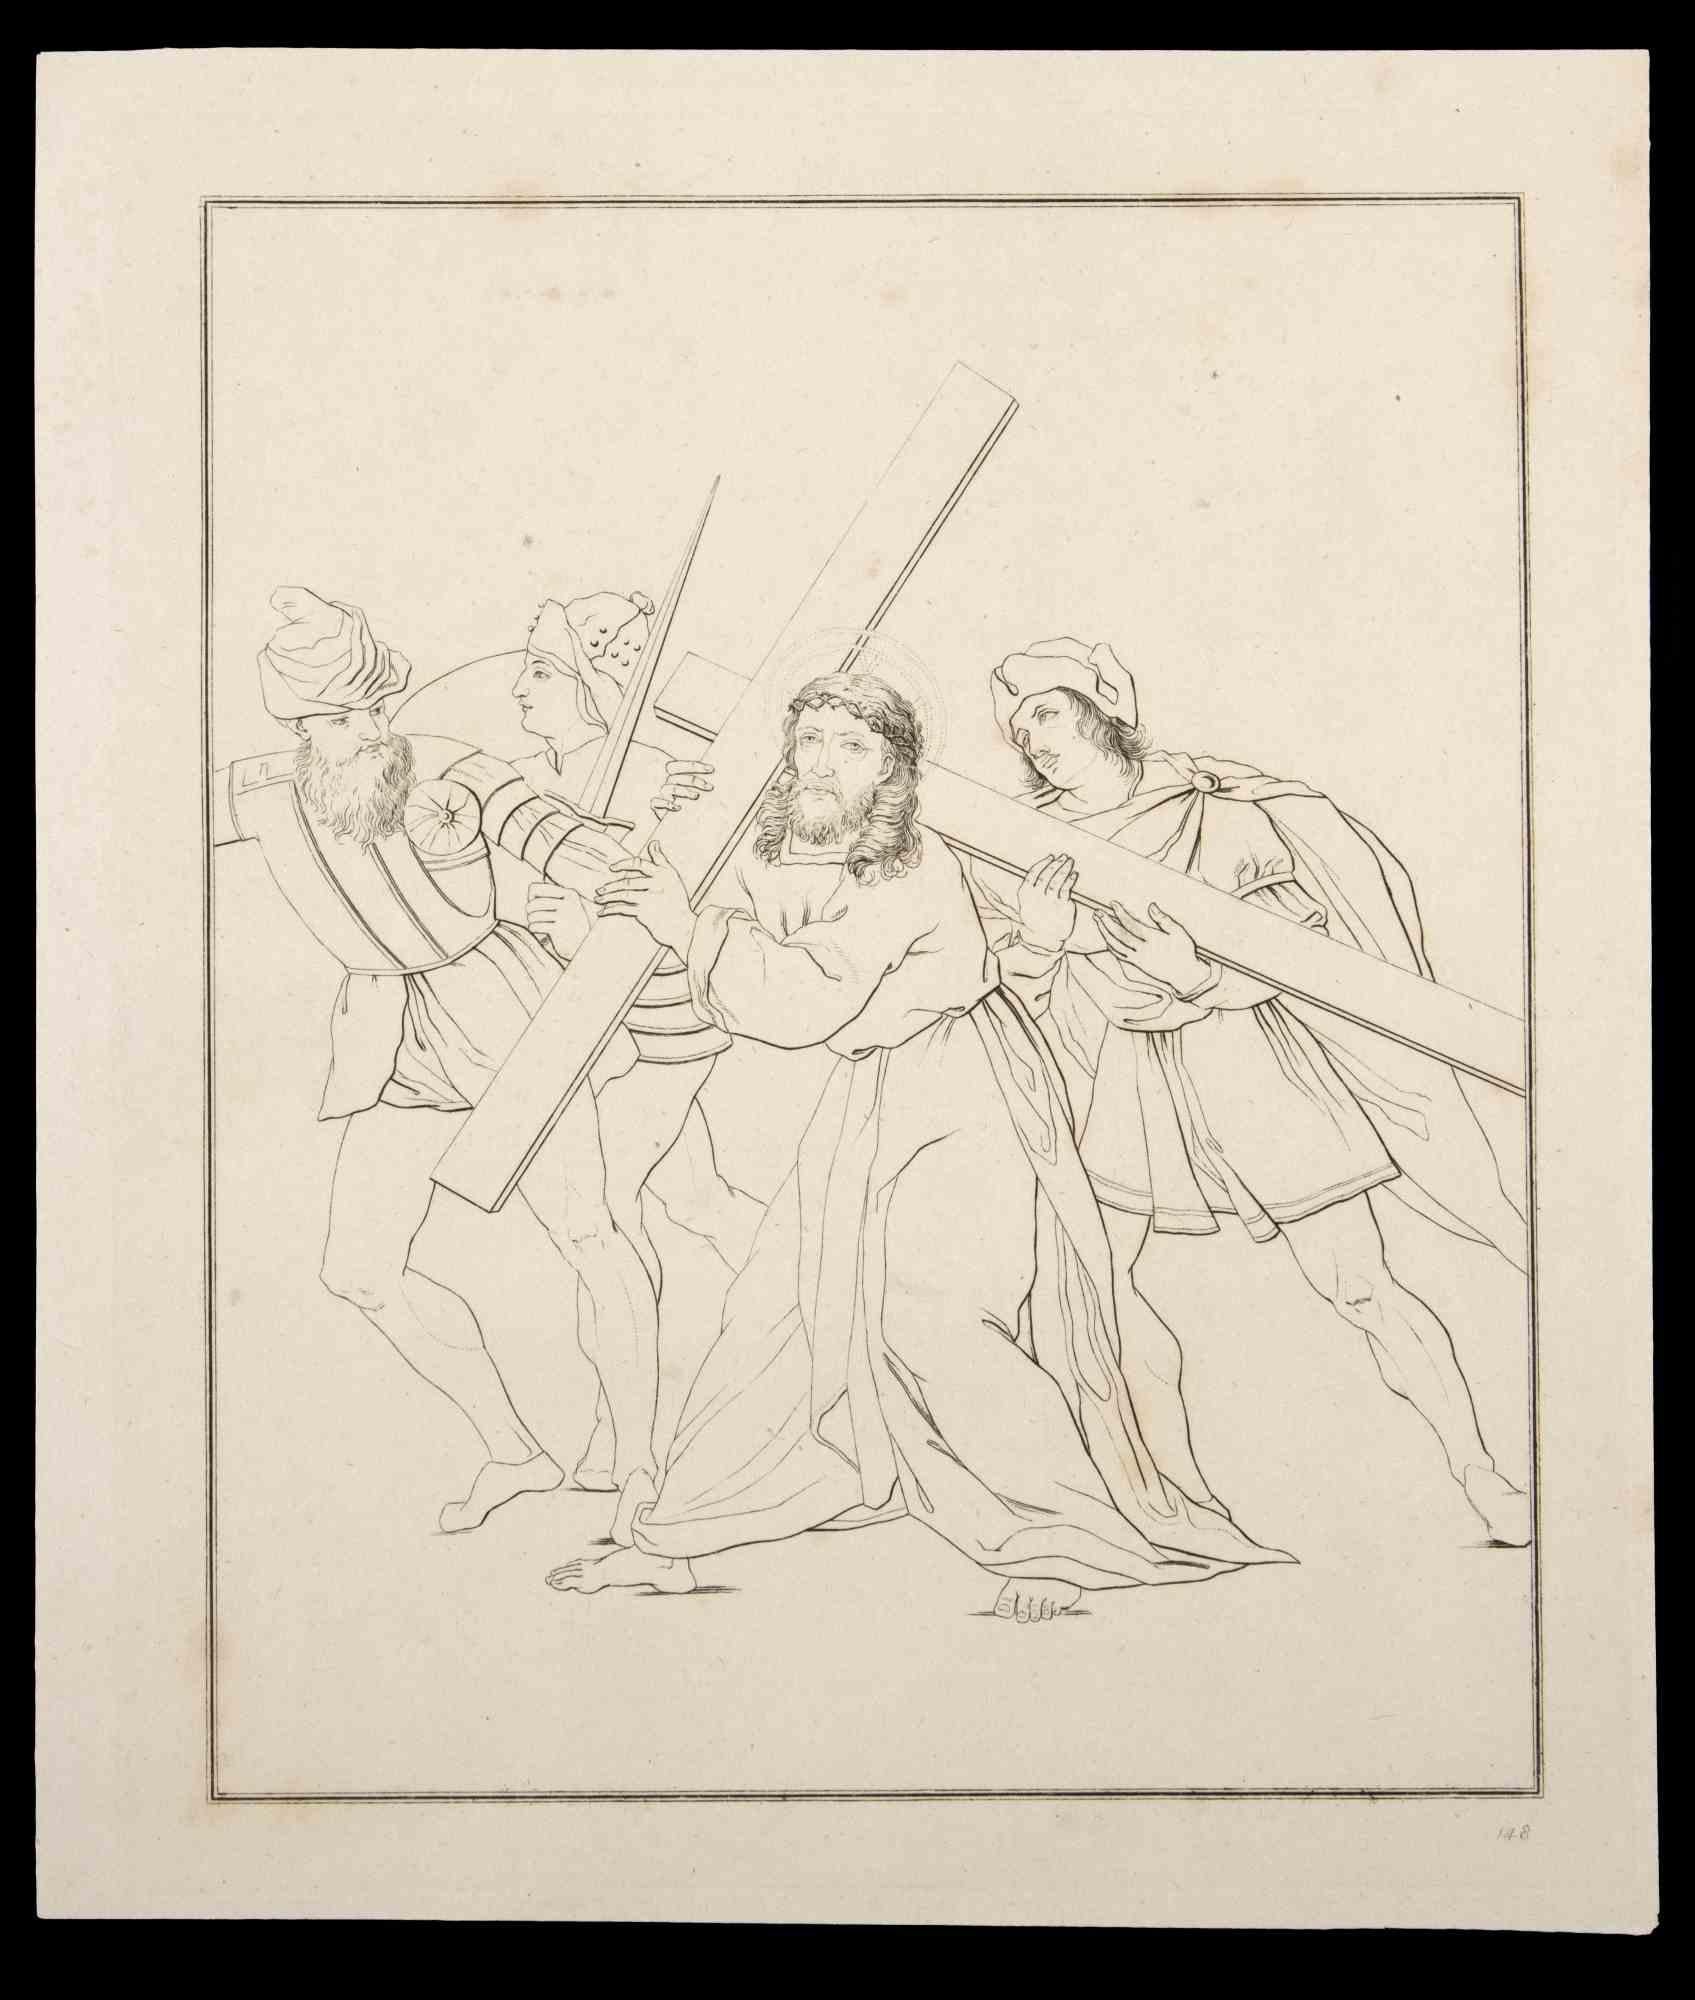 Carrying the cross is an original etching artwork realized by Thomas Holloway for Johann Caspar Lavater's "Essays on Physiognomy, Designed to Promote the Knowledge and the Love of Mankind", London, Bensley, 1810. 

Good conditions, except for some